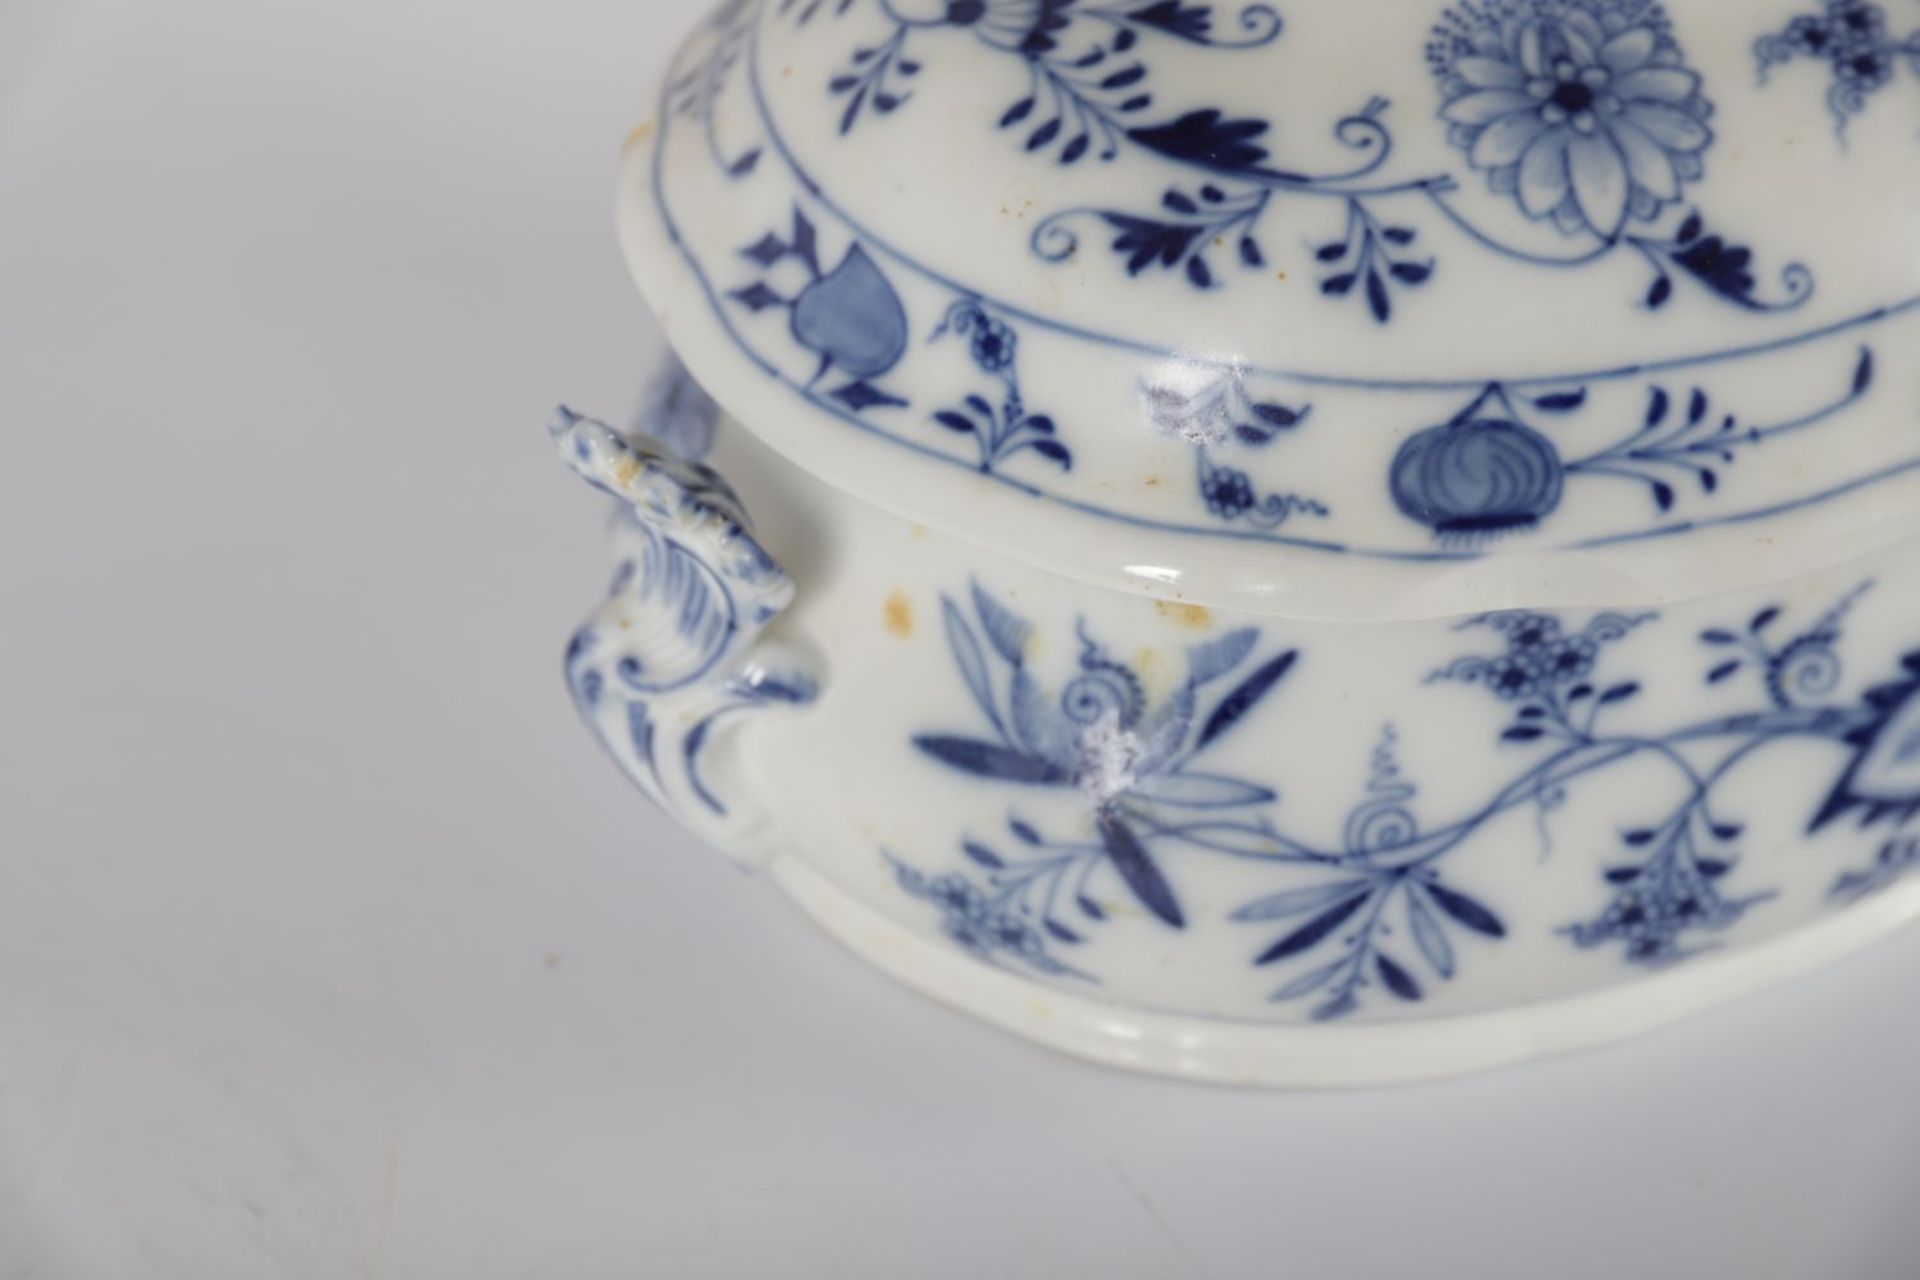 19TH-CENTURY MEISSEN BLUE & WHITE TUREEN & COVER - Image 2 of 3